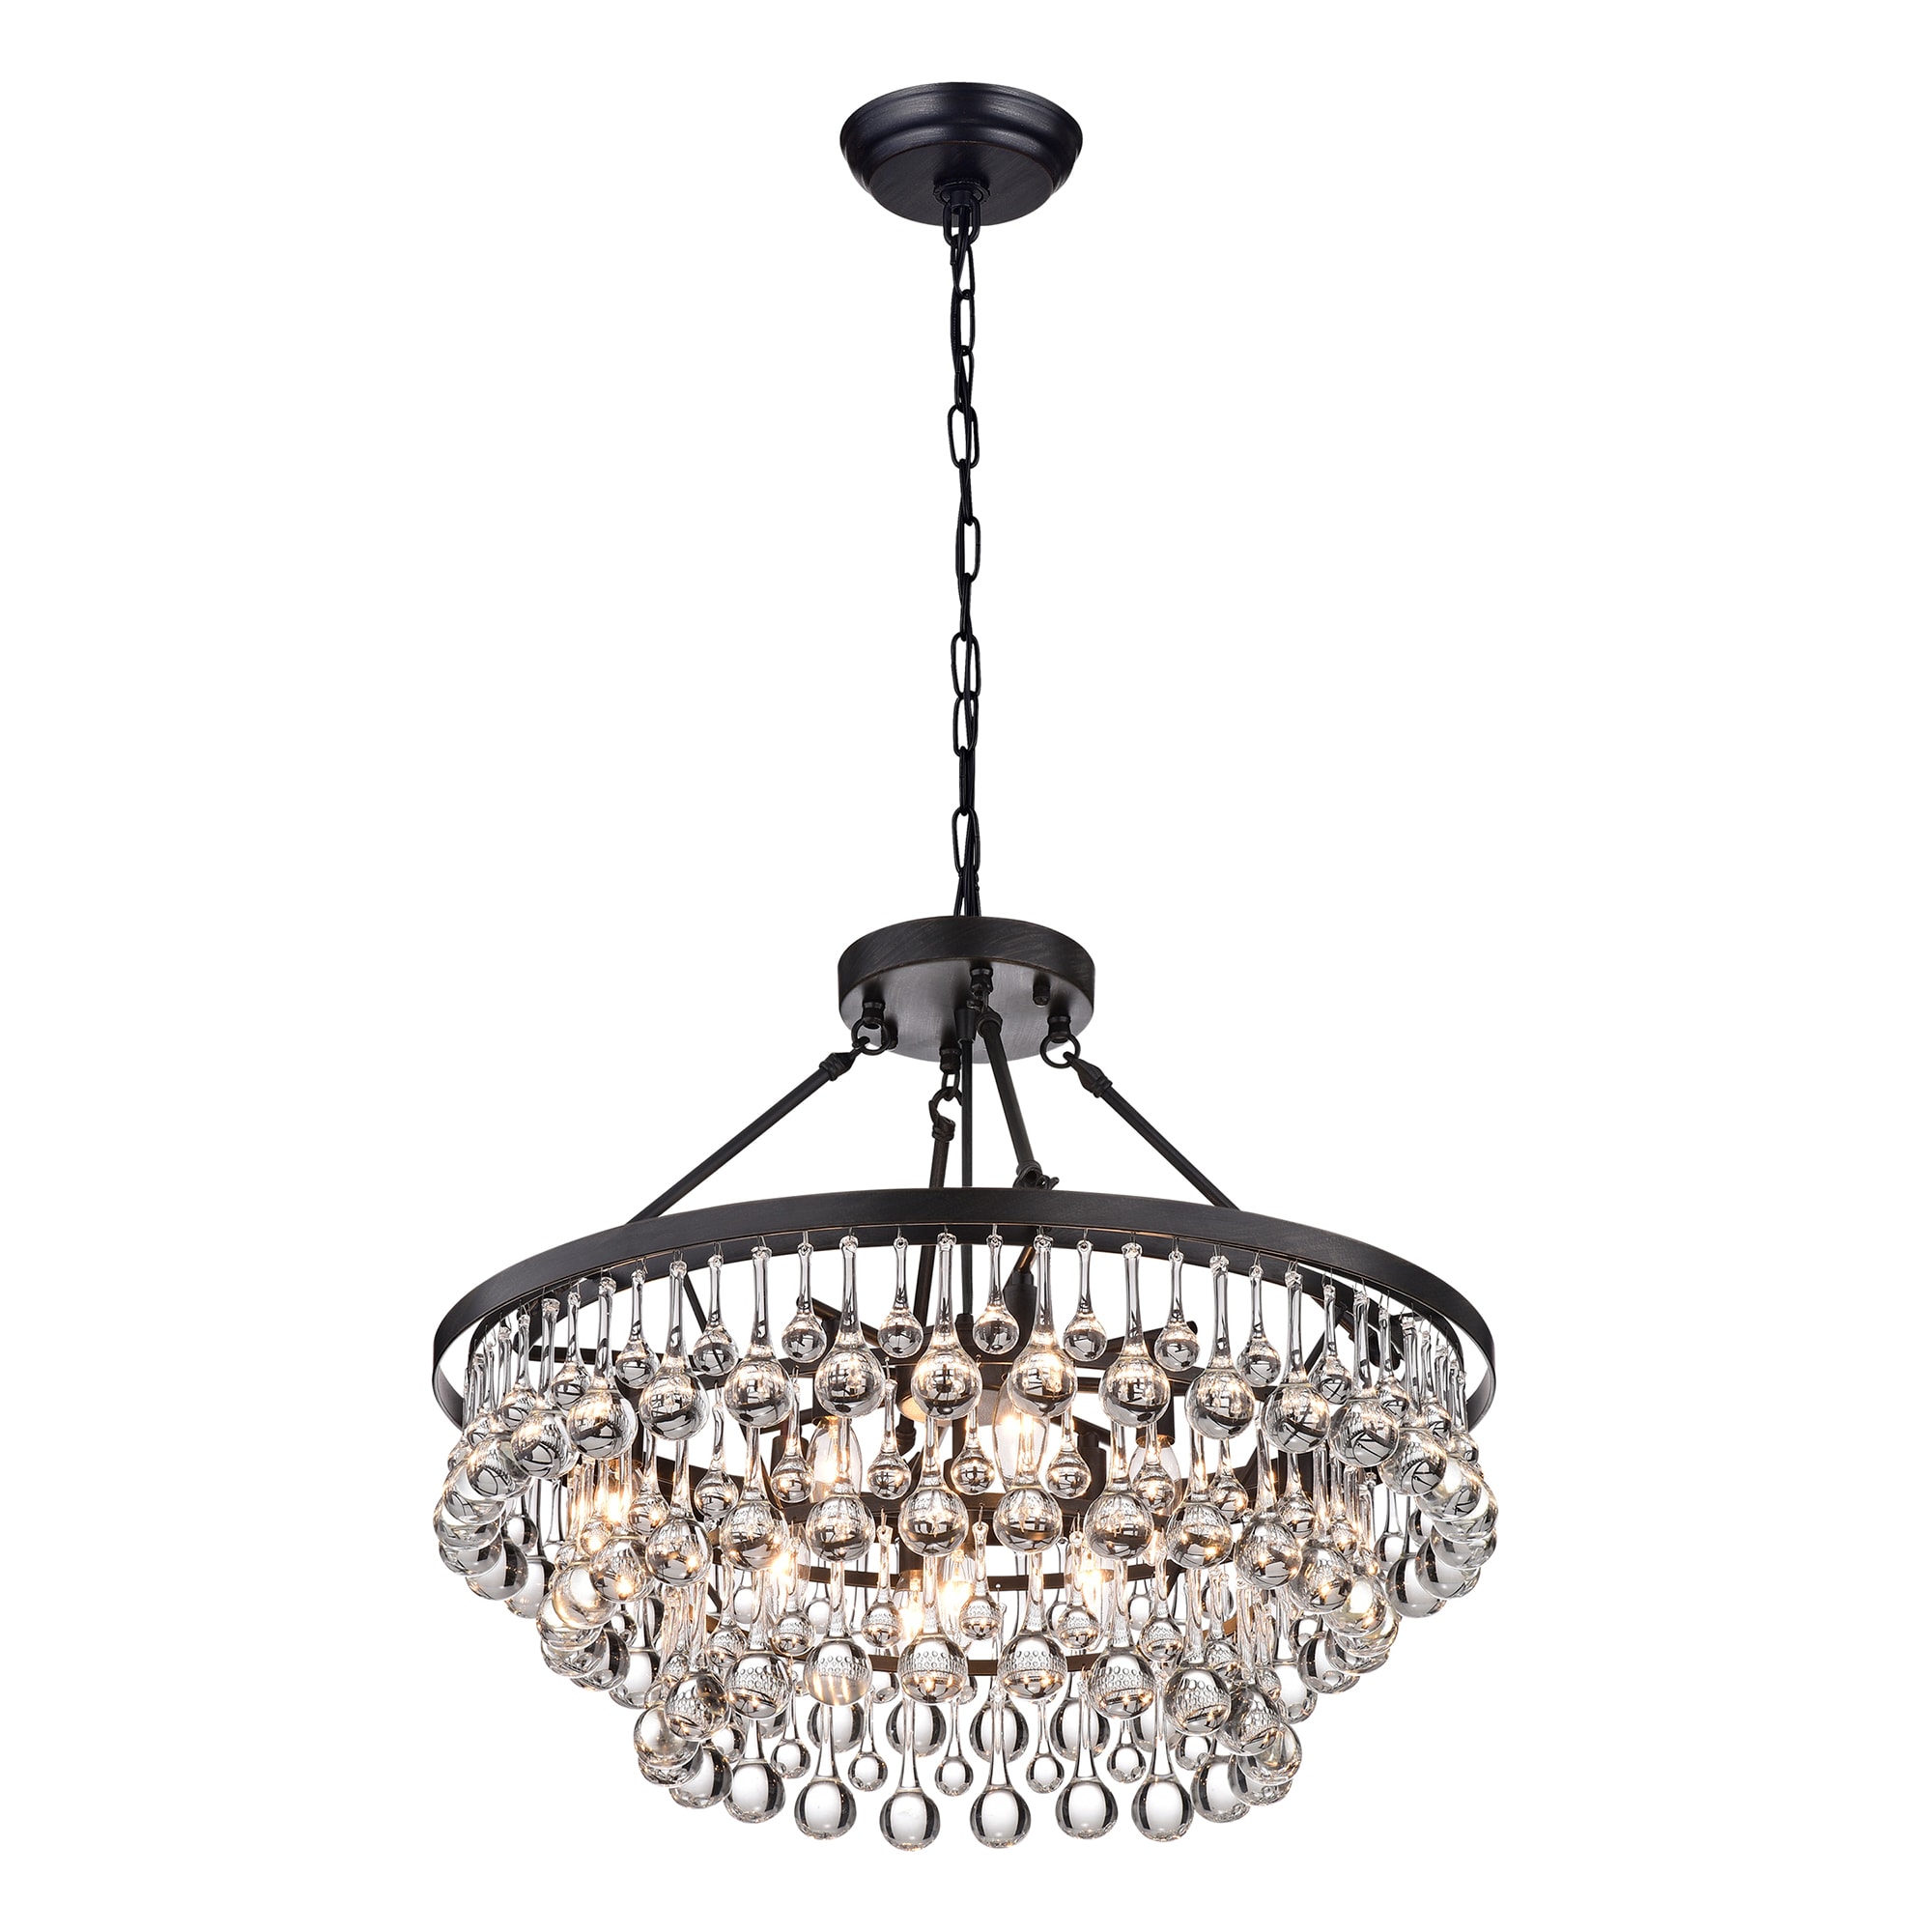 KINWELL Modern Chandelier 9-Light Black Traditional Dry Rated ...